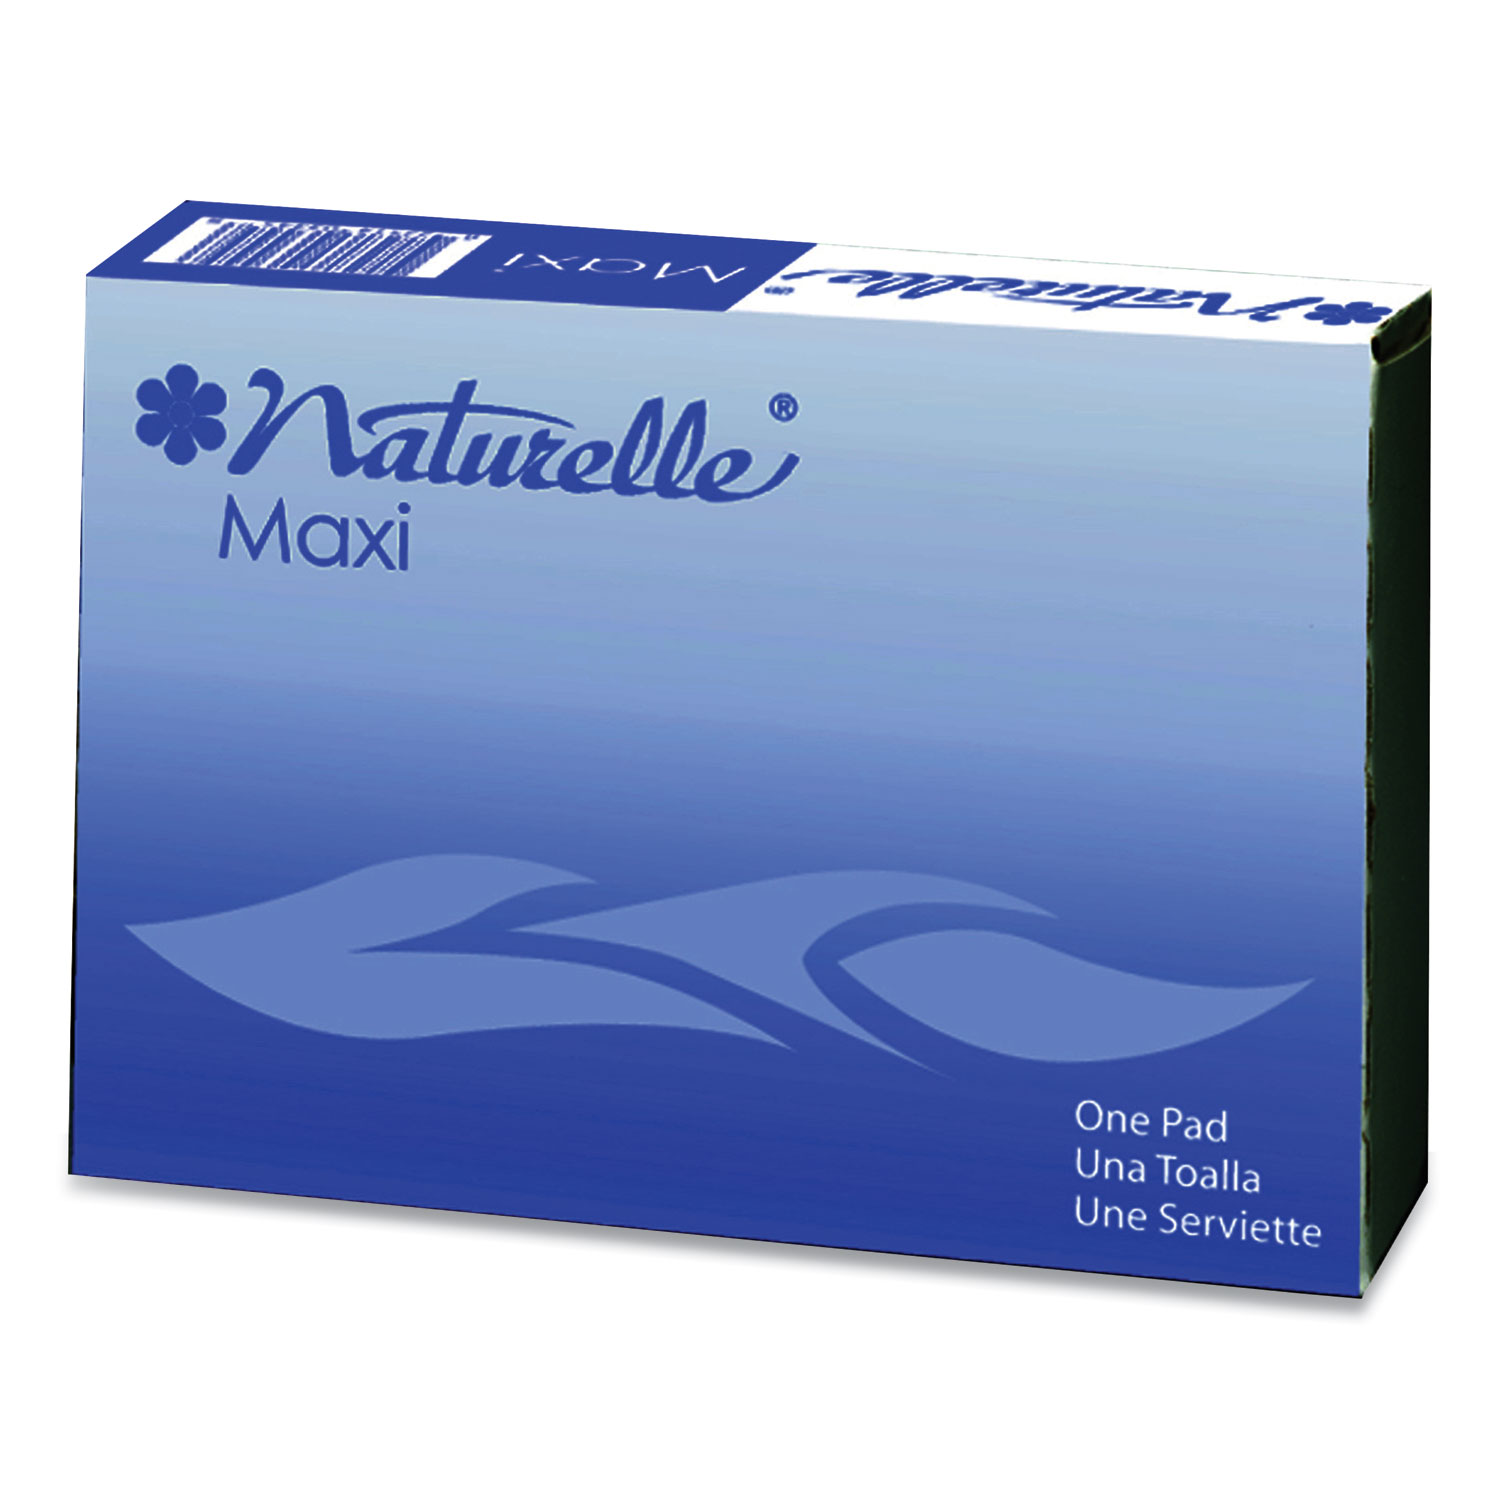 Naturelle Maxi Pads, #4 For Vending Machines, 250 Individually Wrapped/Carton